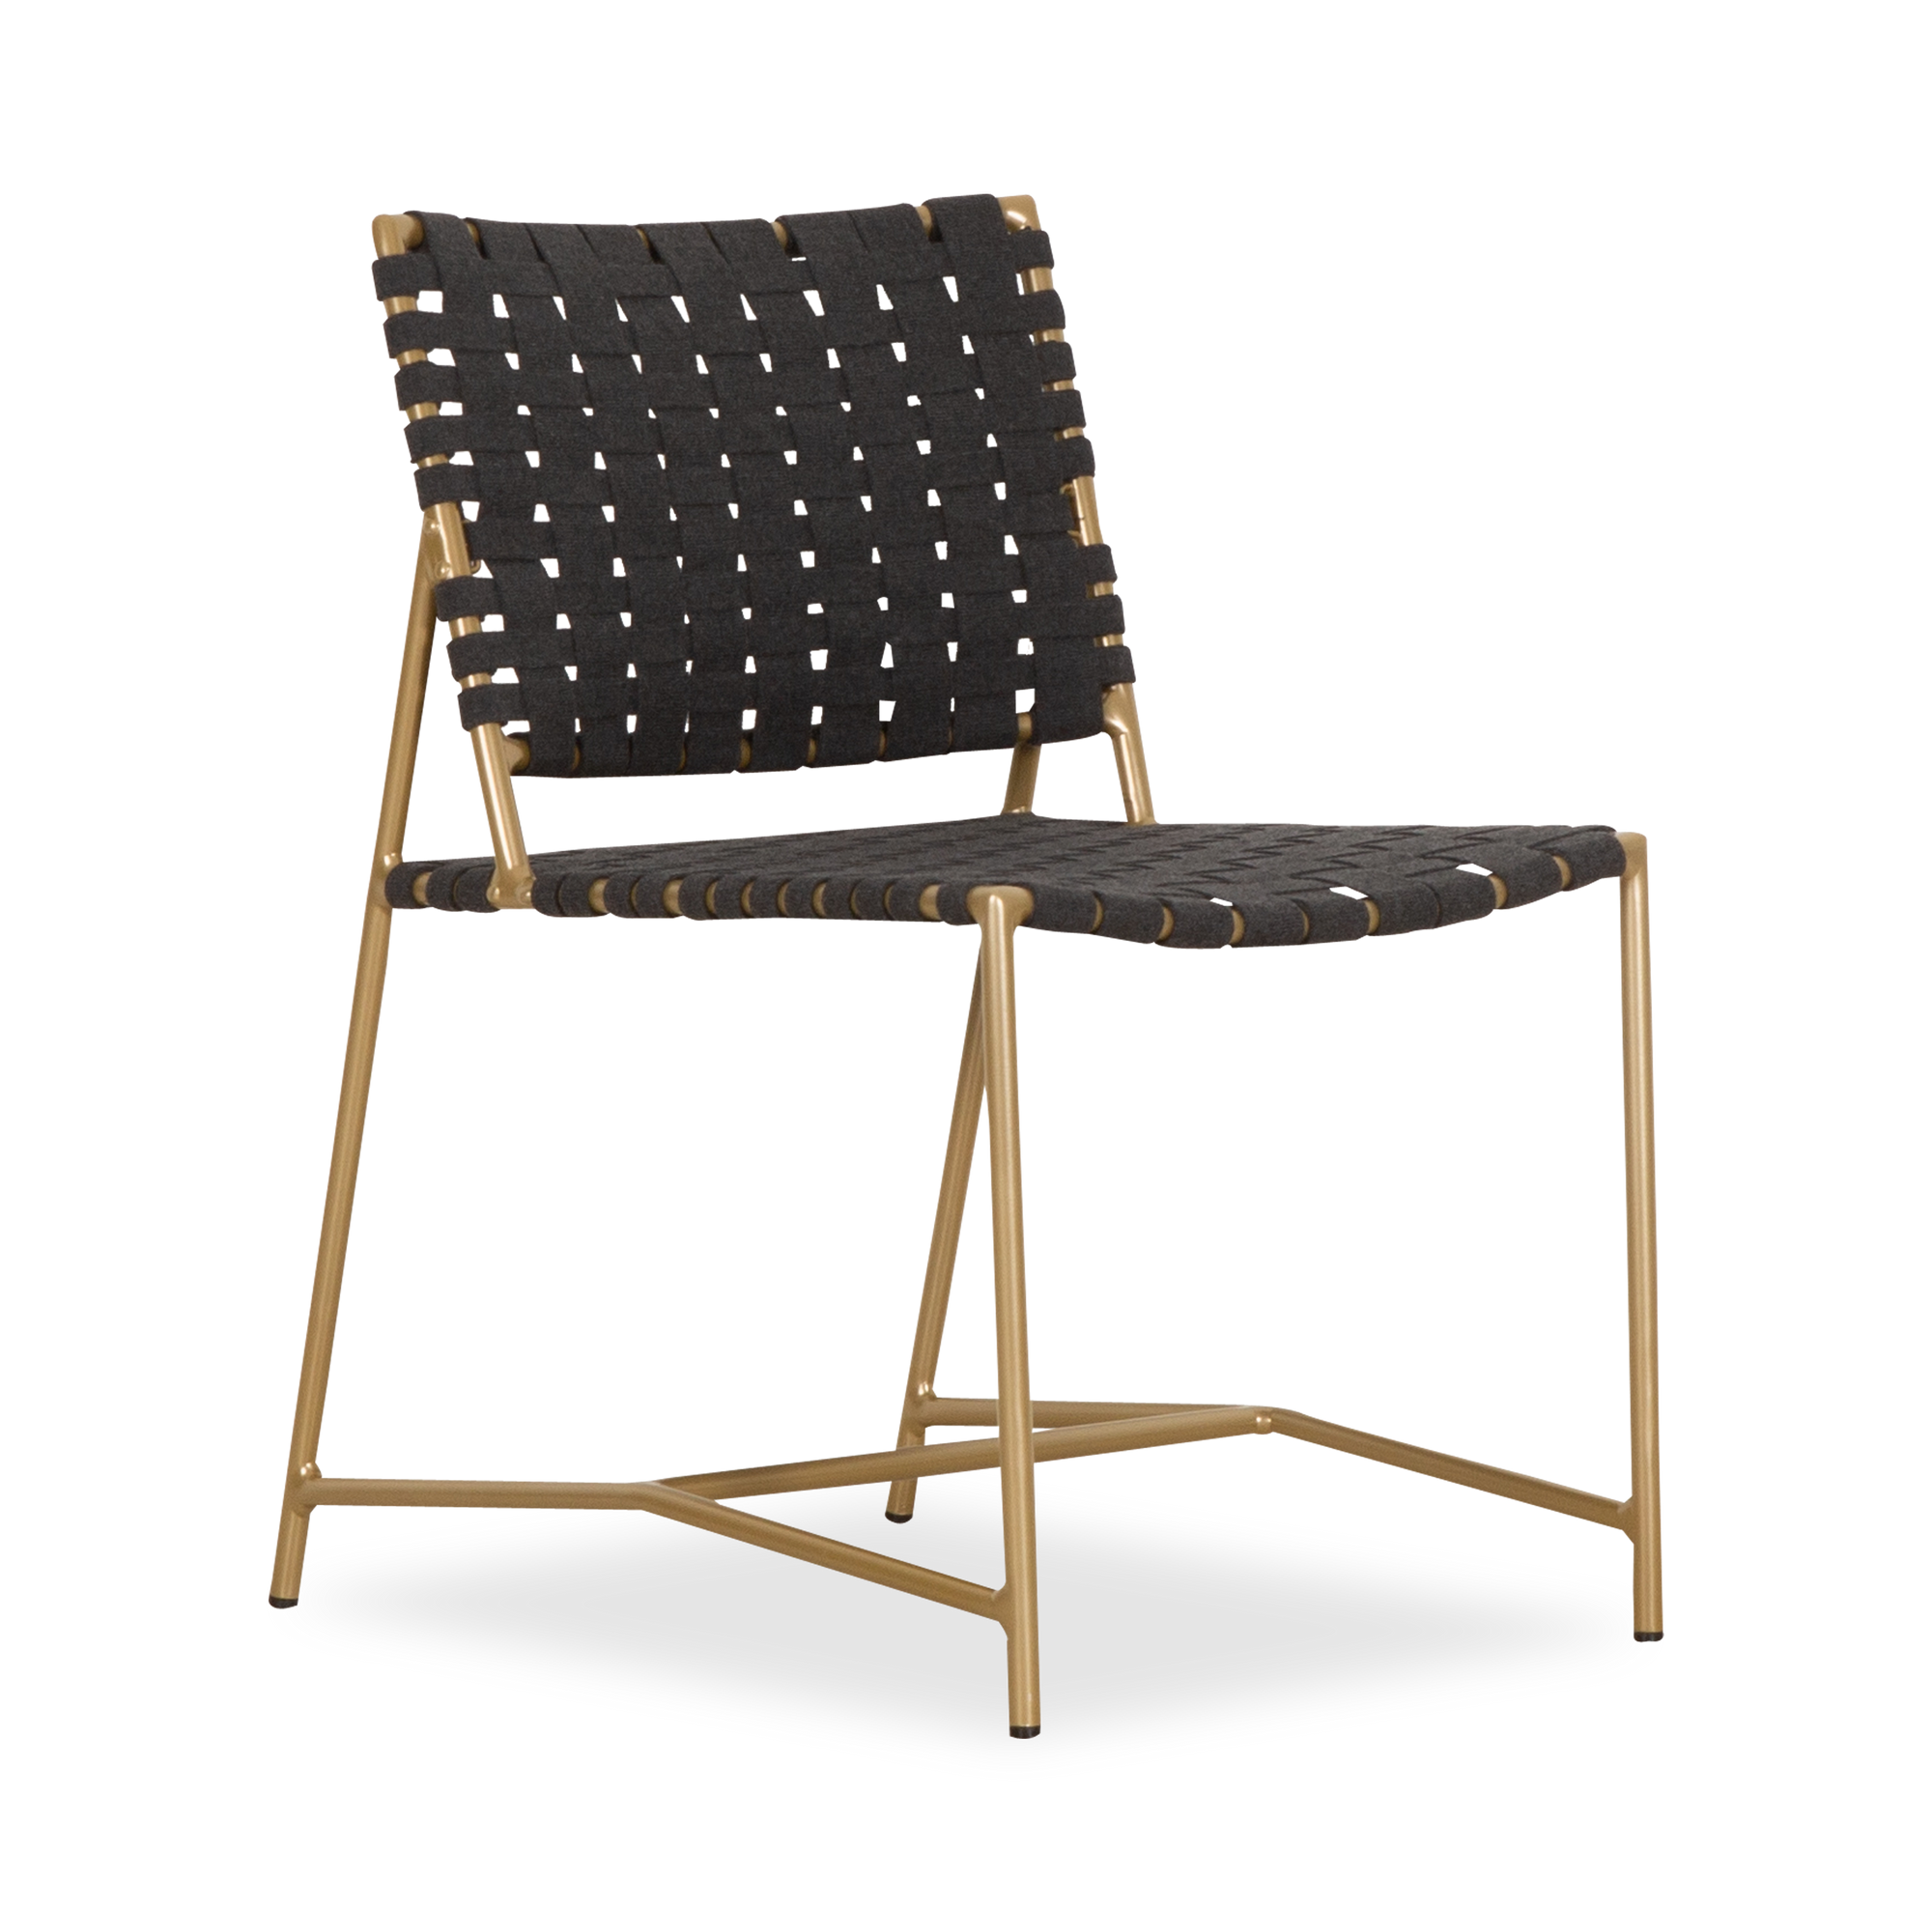 The Stretch Side Chair by Richard Frinier reveals a modern take on vintage Brown Jordan strap designs evolving and elevating previous perceptions about classical strap furniture by